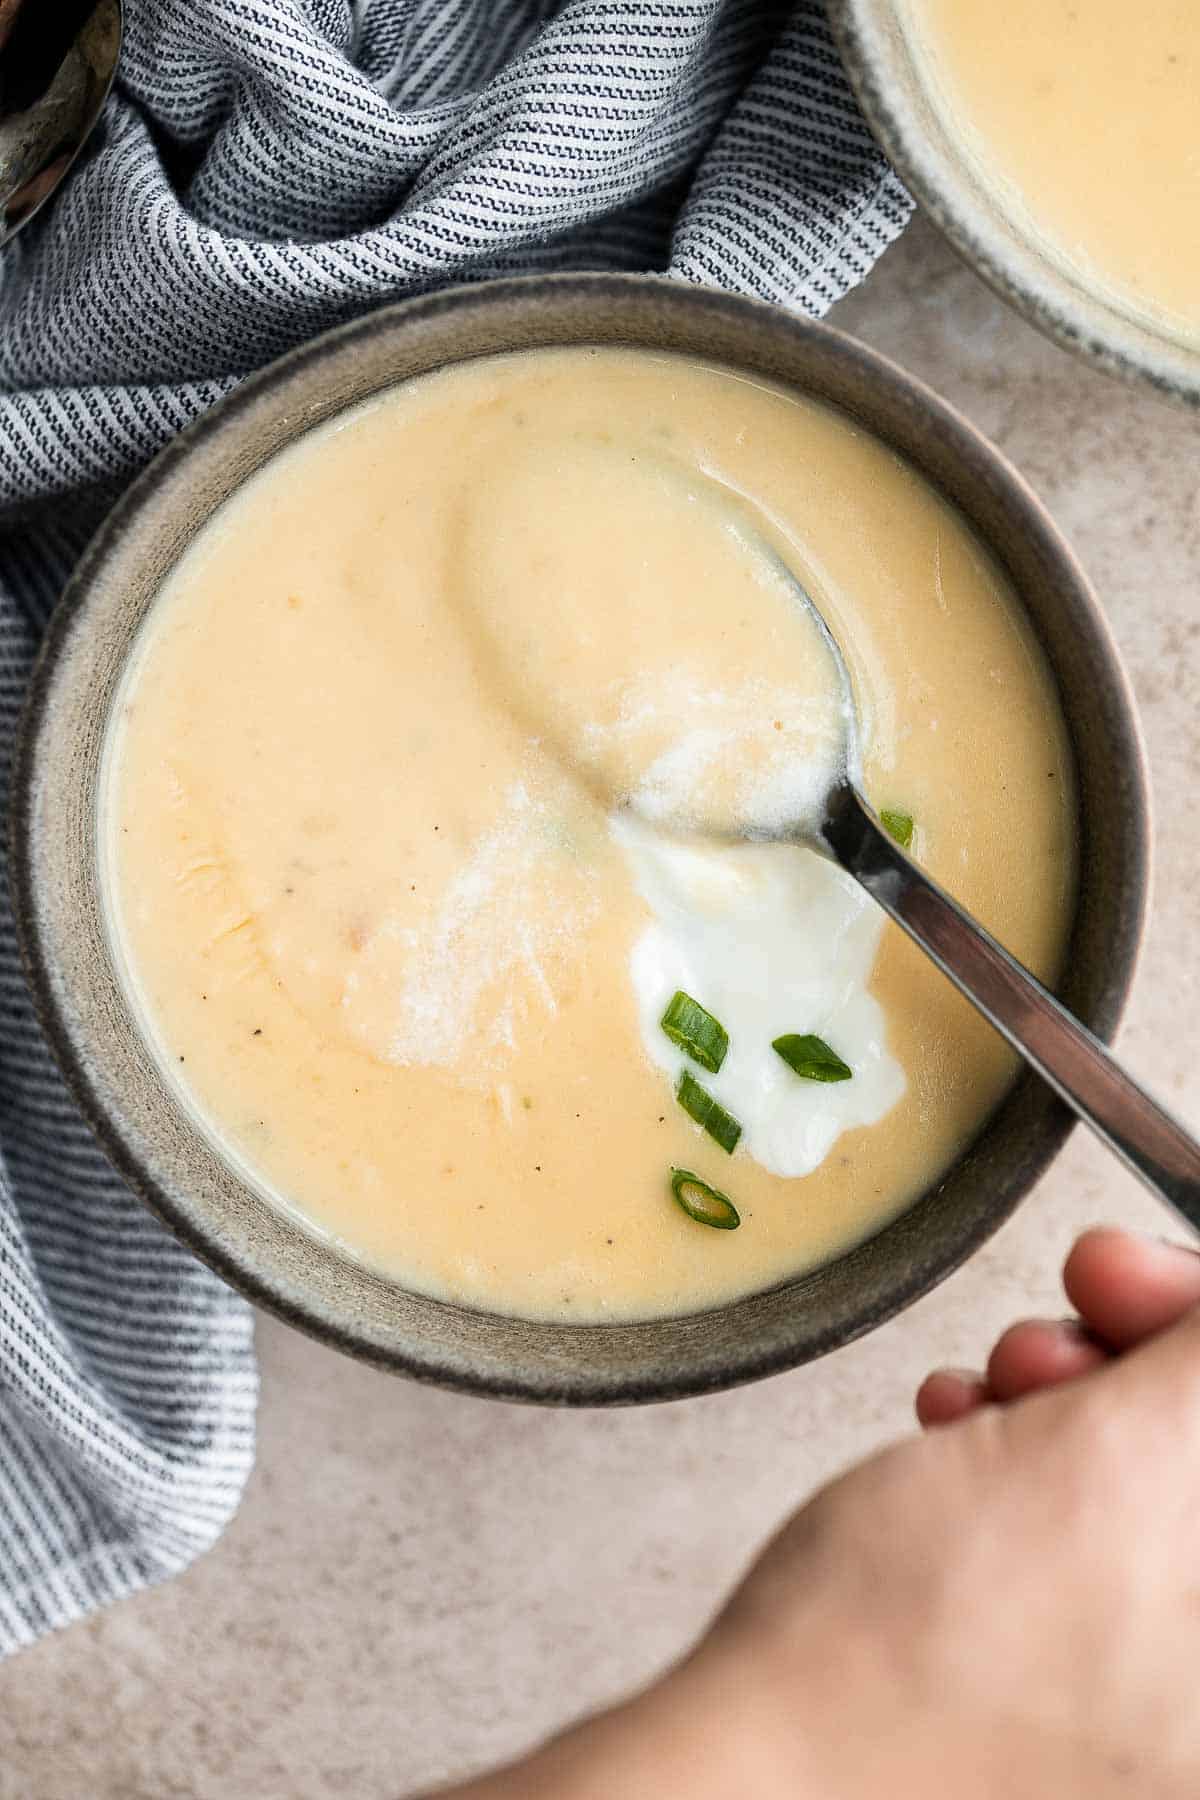 Cheesy Potato Soup is creamy, delicious, and comforting. This recipe takes everyday ingredients and transforms them in 30 minutes to a rich, luscious soup. | aheadofthyme.com